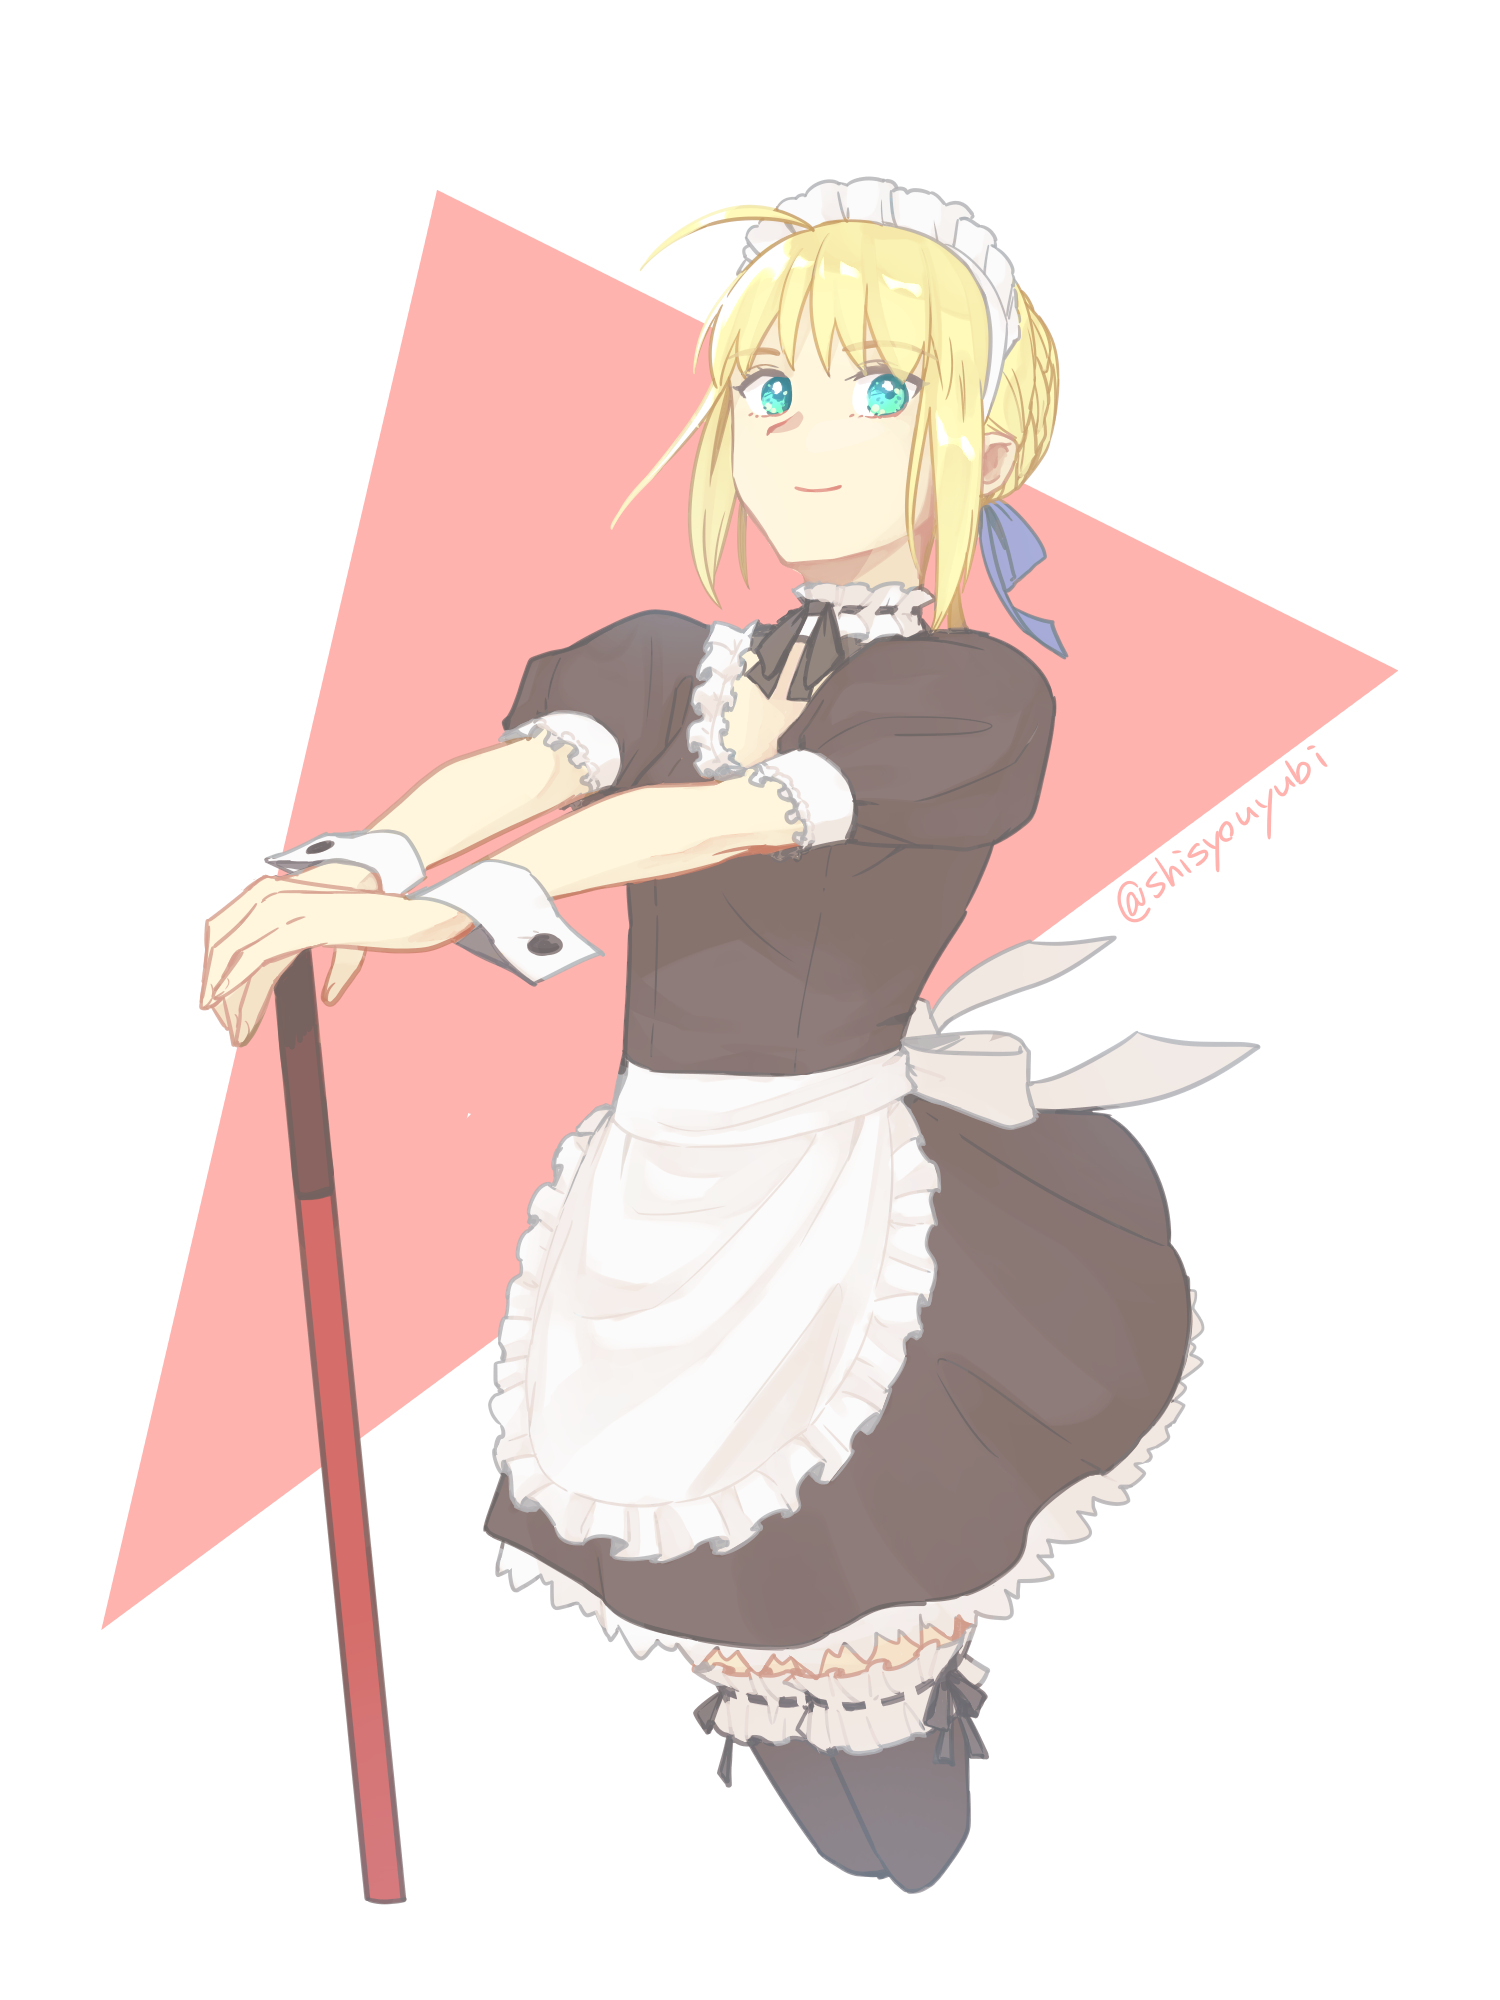 Anime 1500x2000 Fate series Fate/Grand Order Fate/Stay Night anime girls fan art 2D portrait display simple background looking at viewer maid outfit Saber small boobs blue eyes blonde Artoria Pendragon